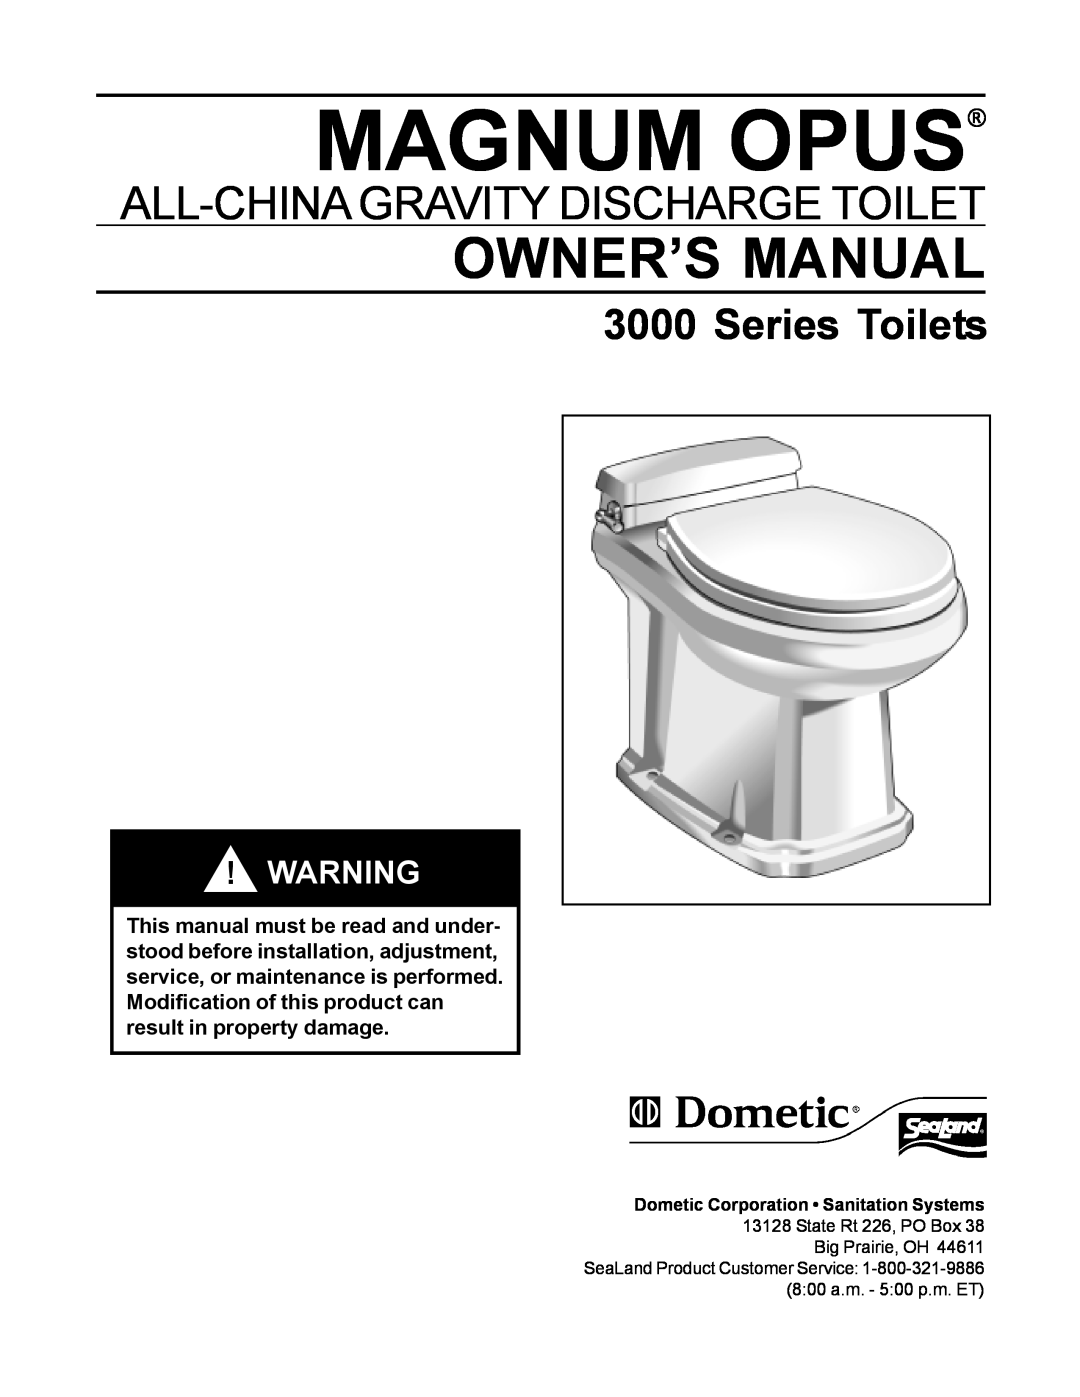 Dometic 3000 Series owner manual Magnum Opus, All-Chinagravity Discharge Toilet, Series Toilets 